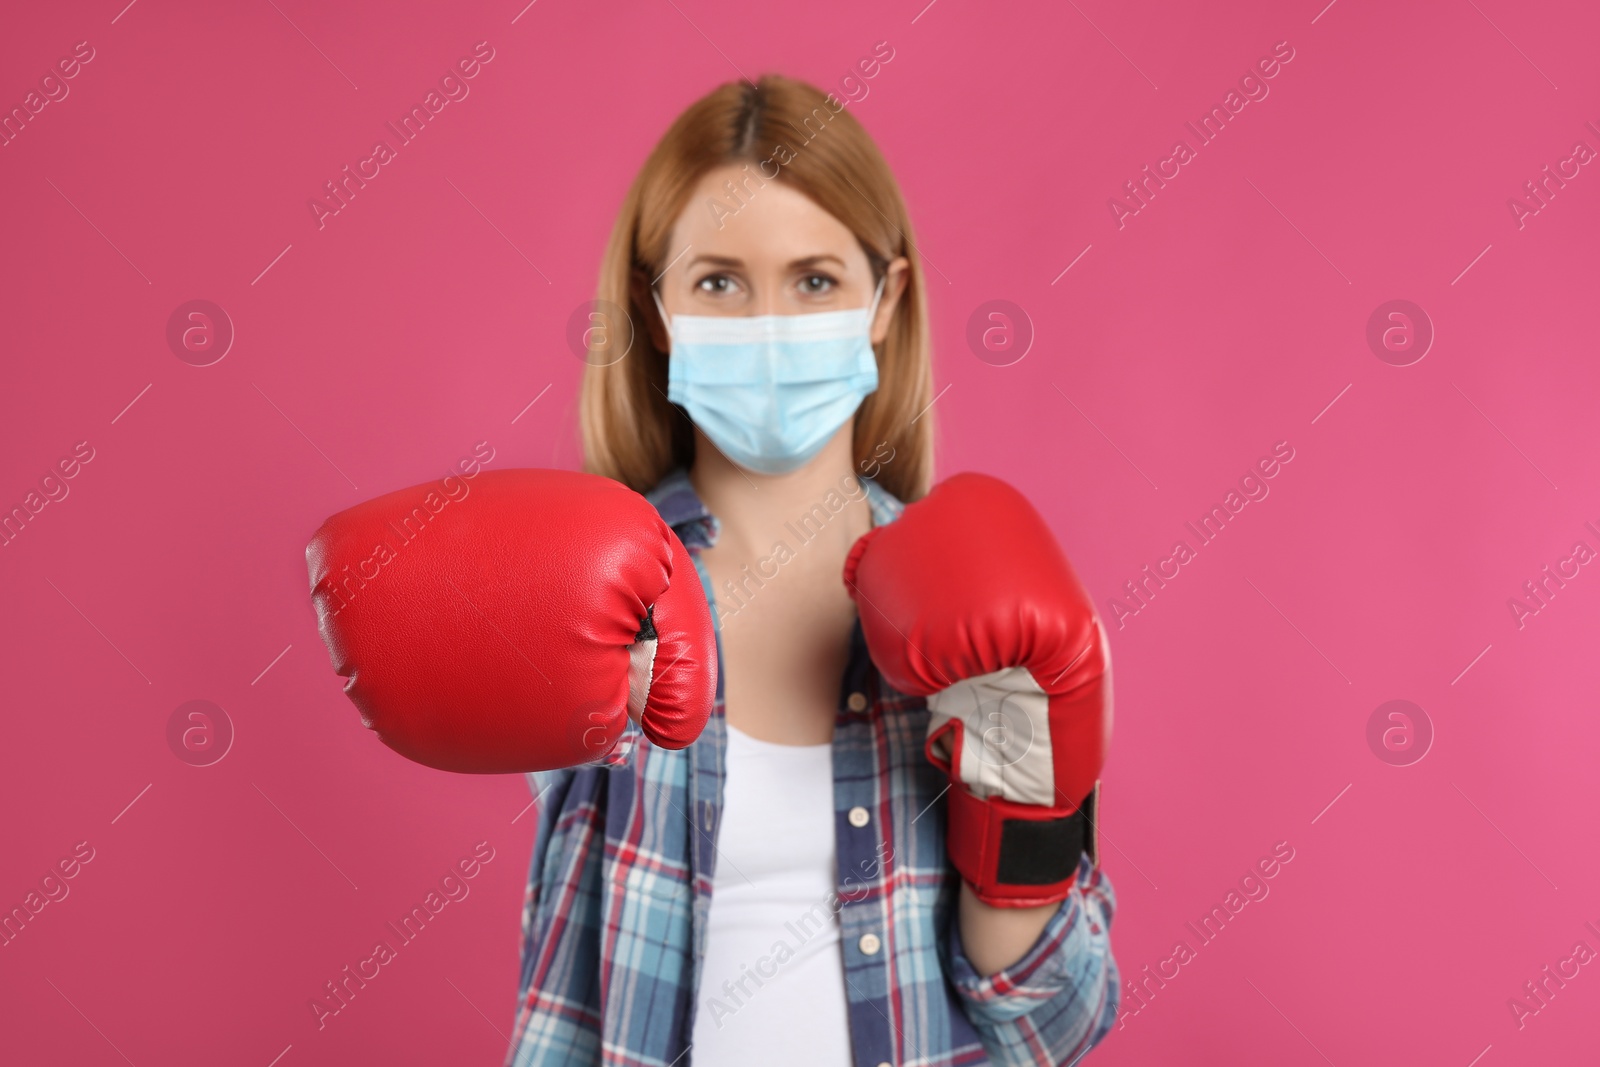 Photo of Woman with protective mask and boxing gloves on pink background. Strong immunity concept